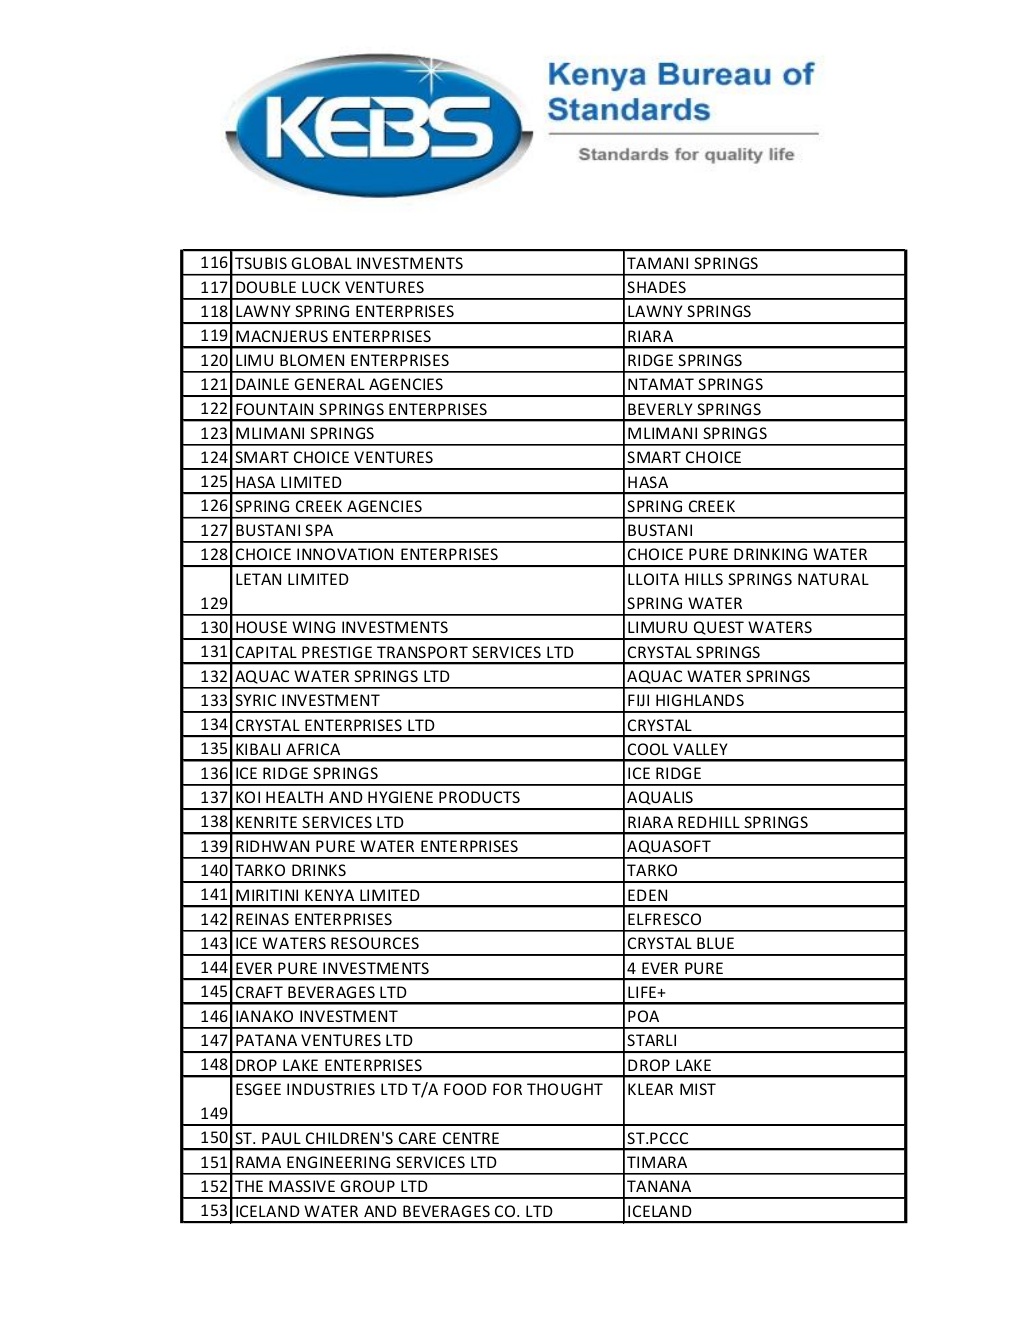 list-of-368-water-brands-banned-by-kebs-4-1024